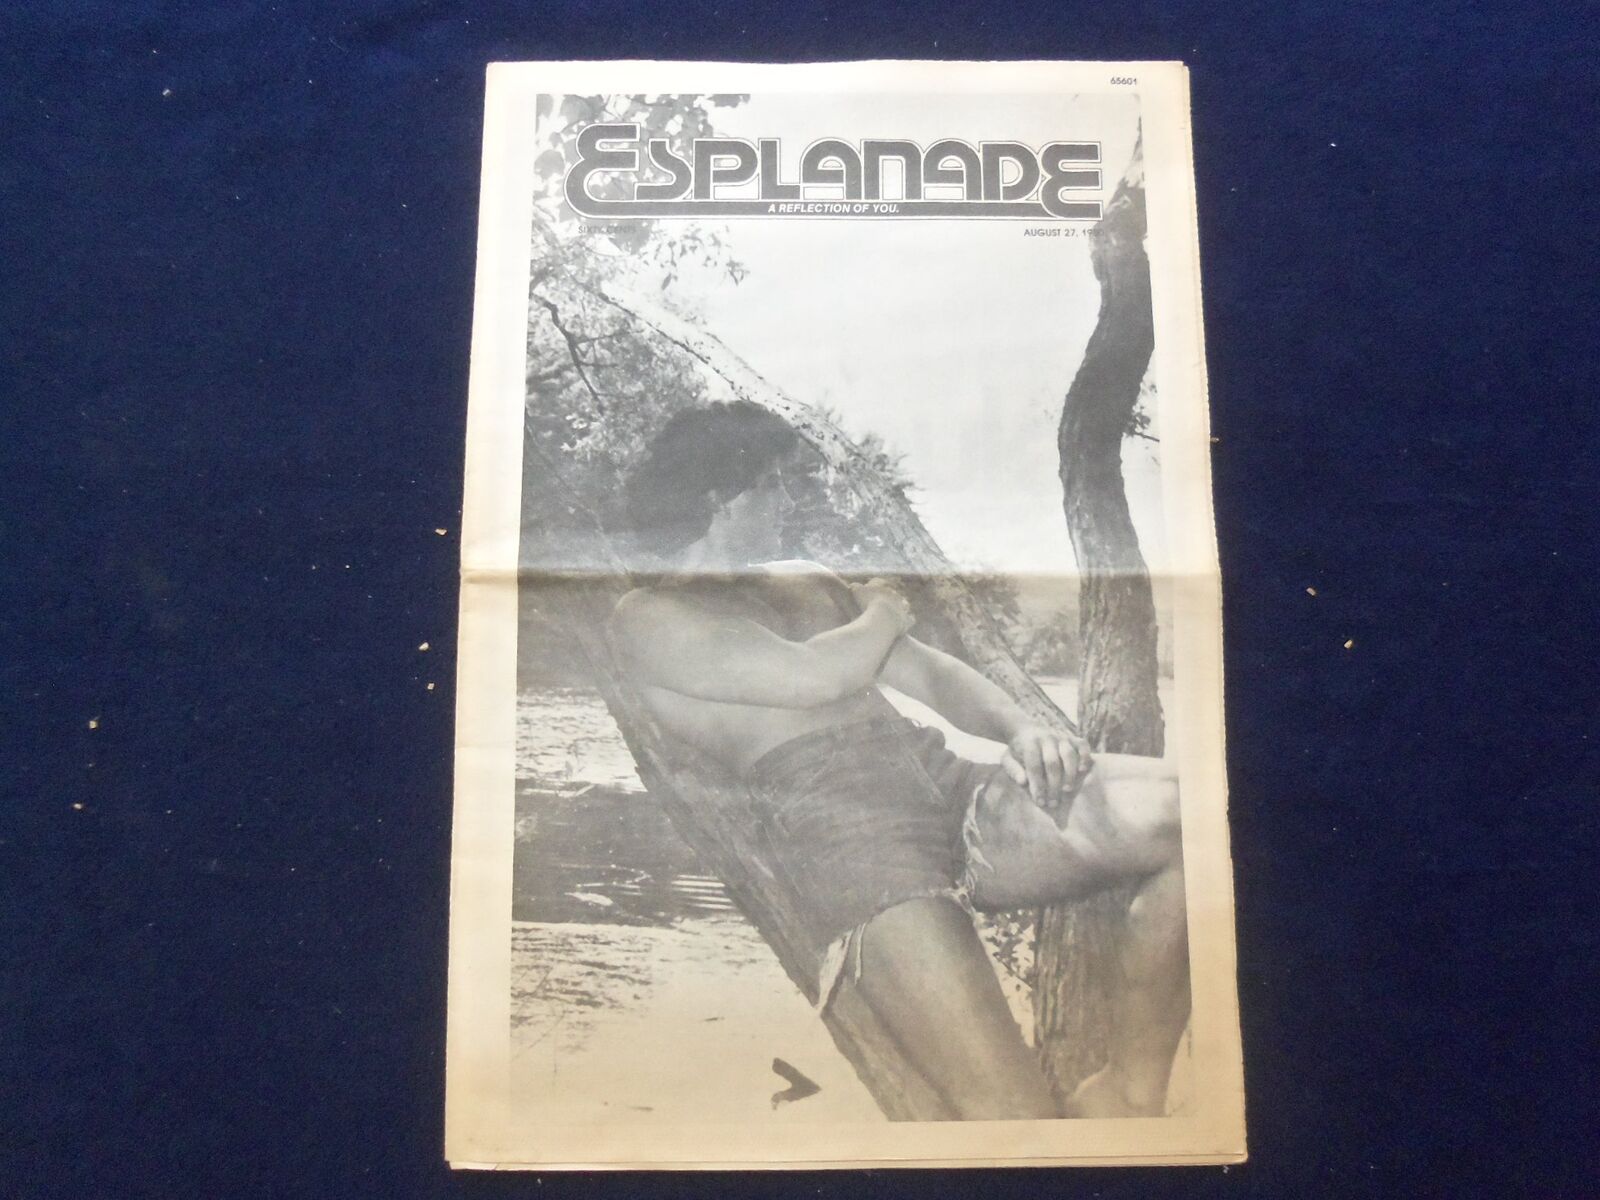 1980 AUGUST 27 ESPLANADE NEWSPAPER - COMING OUT - SUPER STAR - NP 6835